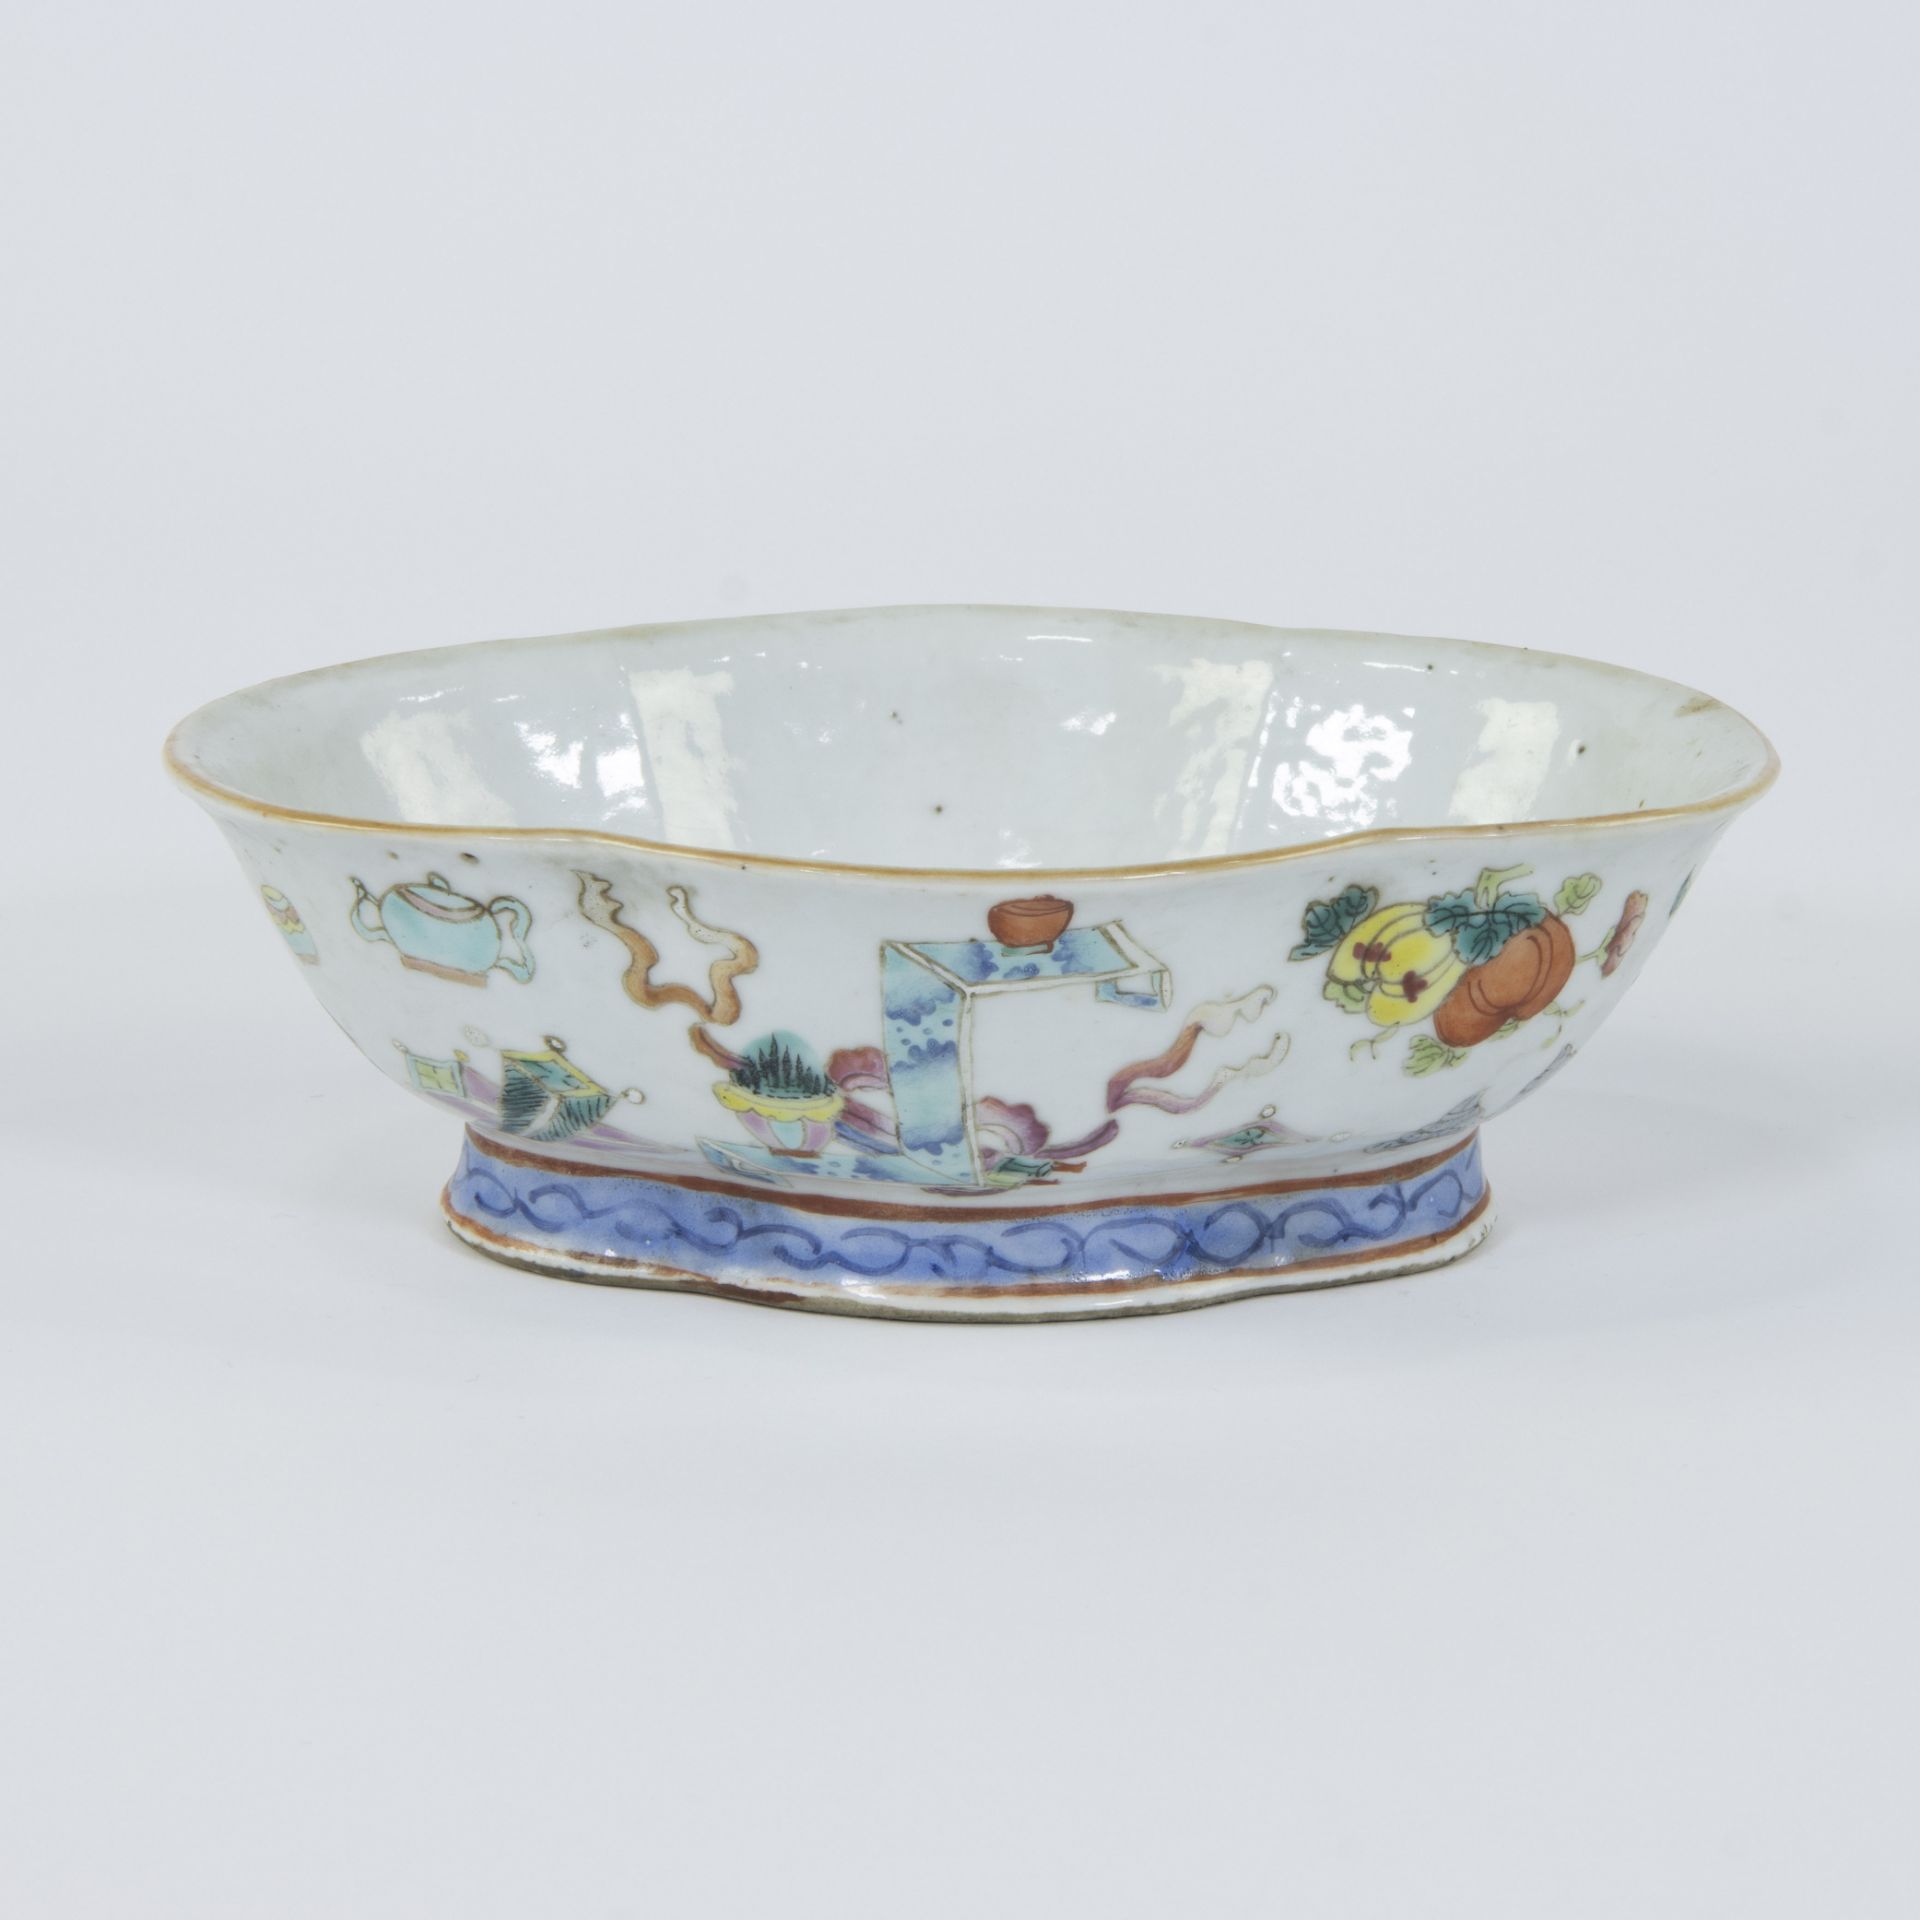 A Chinese famille rose bowl with decoration of valuables and fruits, 19th century